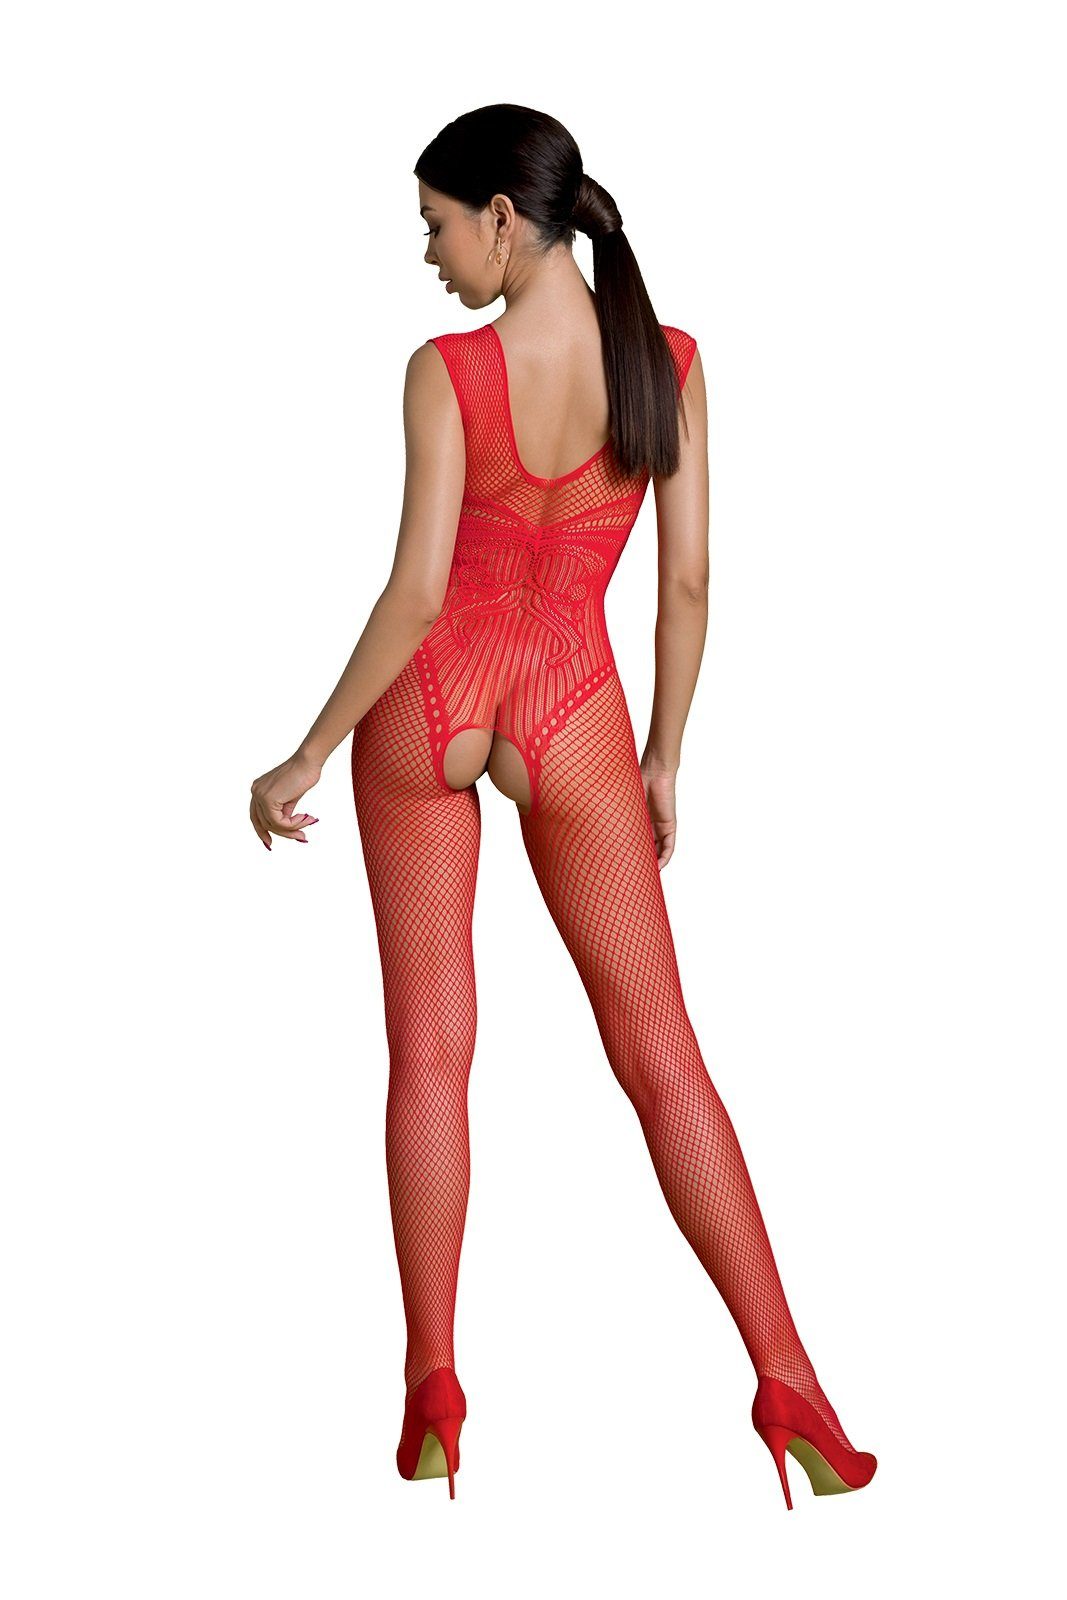 Passion (1 St) Collection 20 ouvert Bodystocking Passion Netz rot Catsuit transparent Eco DEN Bodystocking